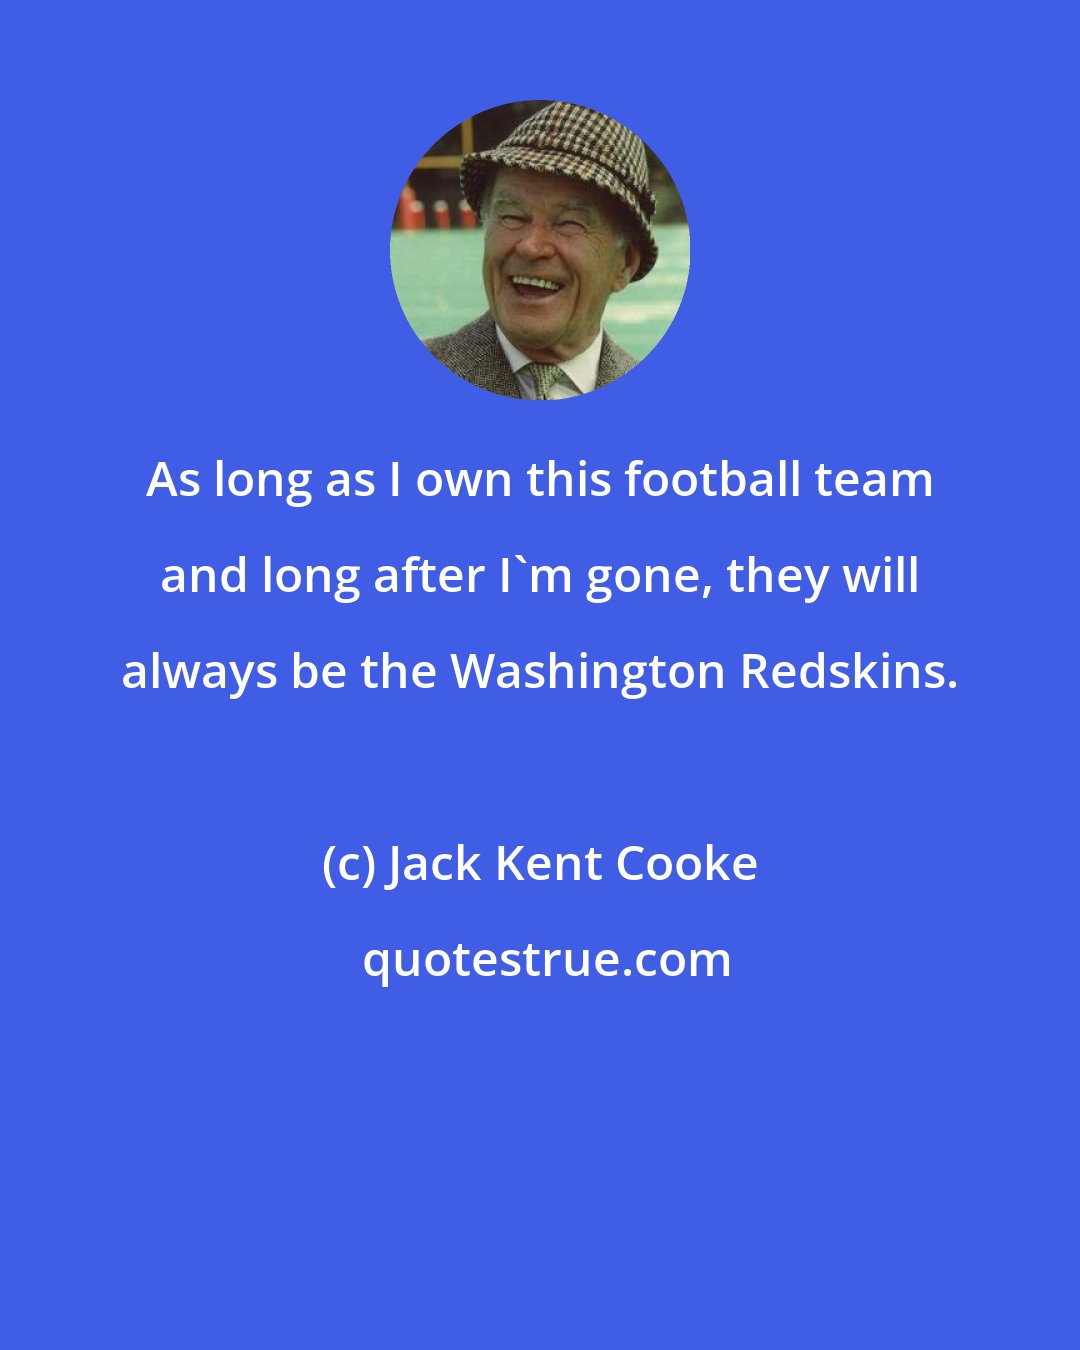 Jack Kent Cooke: As long as I own this football team and long after I'm gone, they will always be the Washington Redskins.